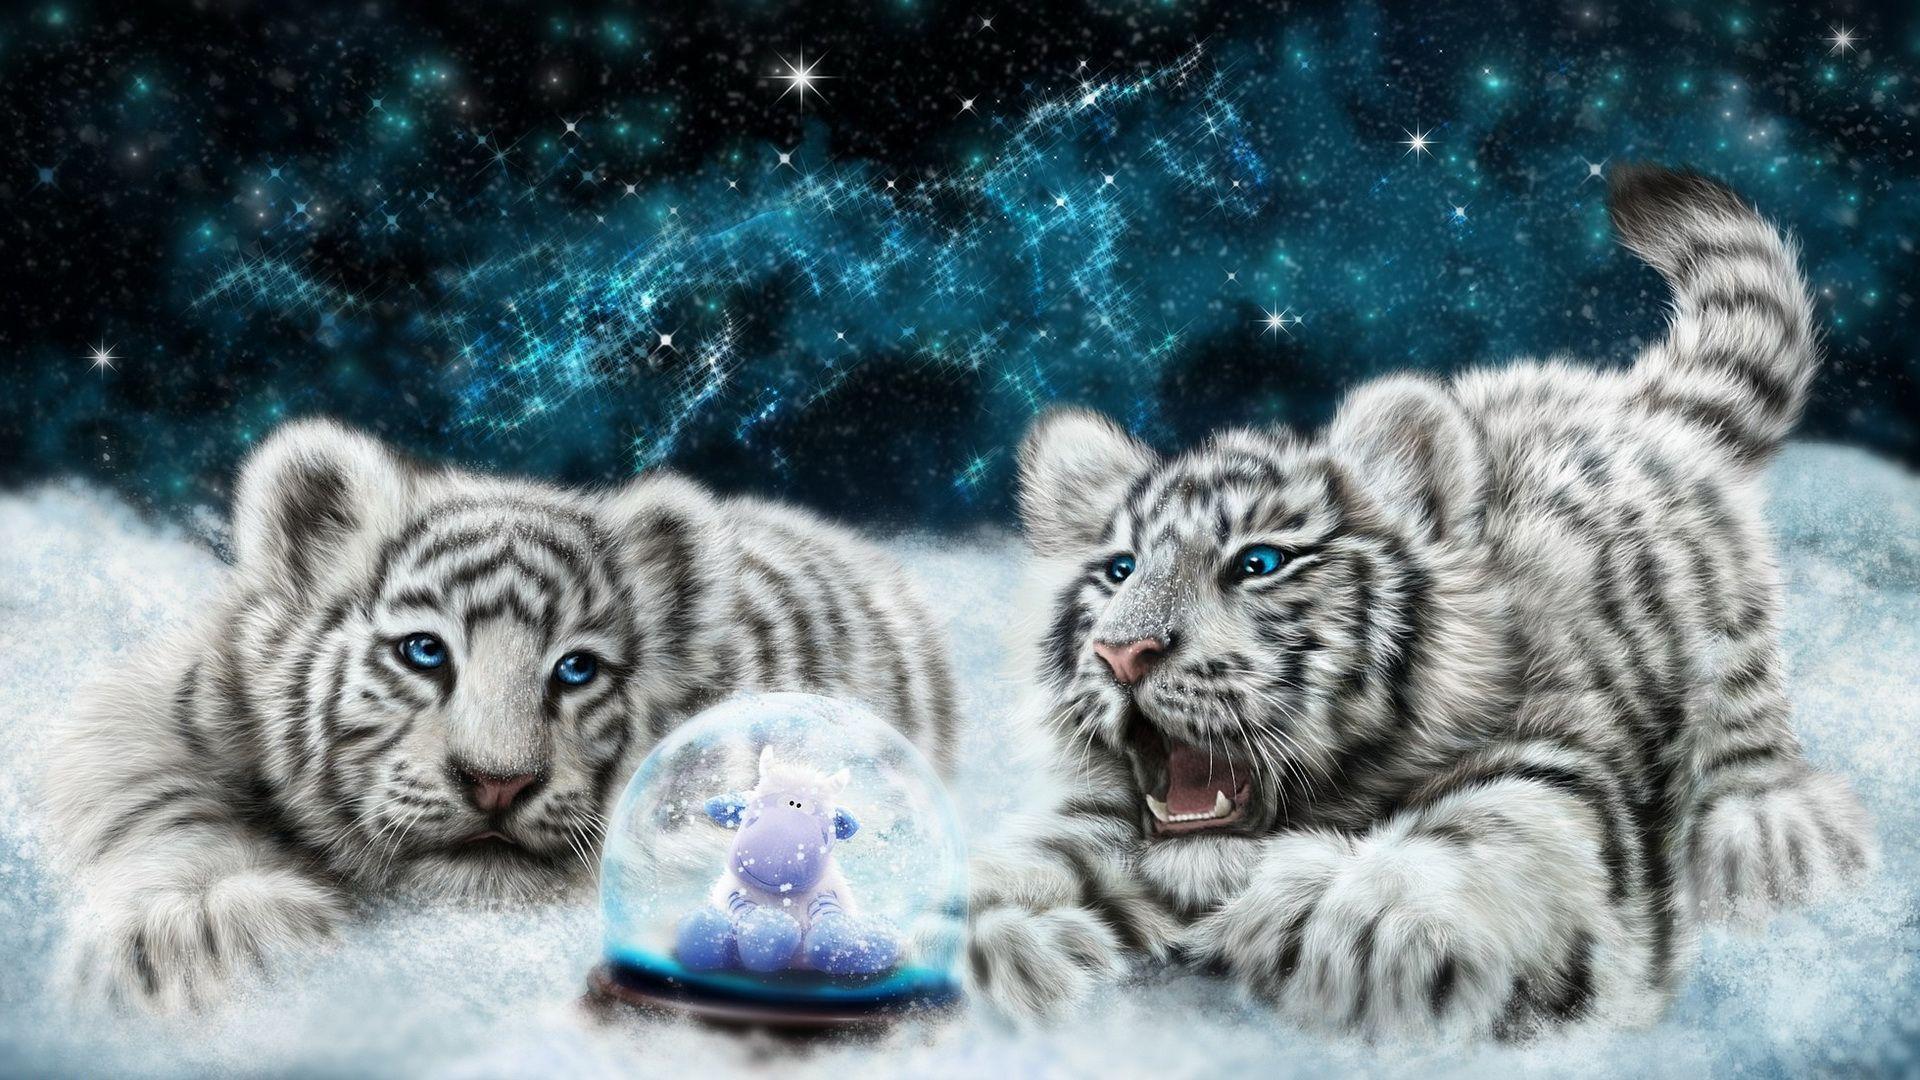 White tiger cubs looking at the snowglobe HD desktop